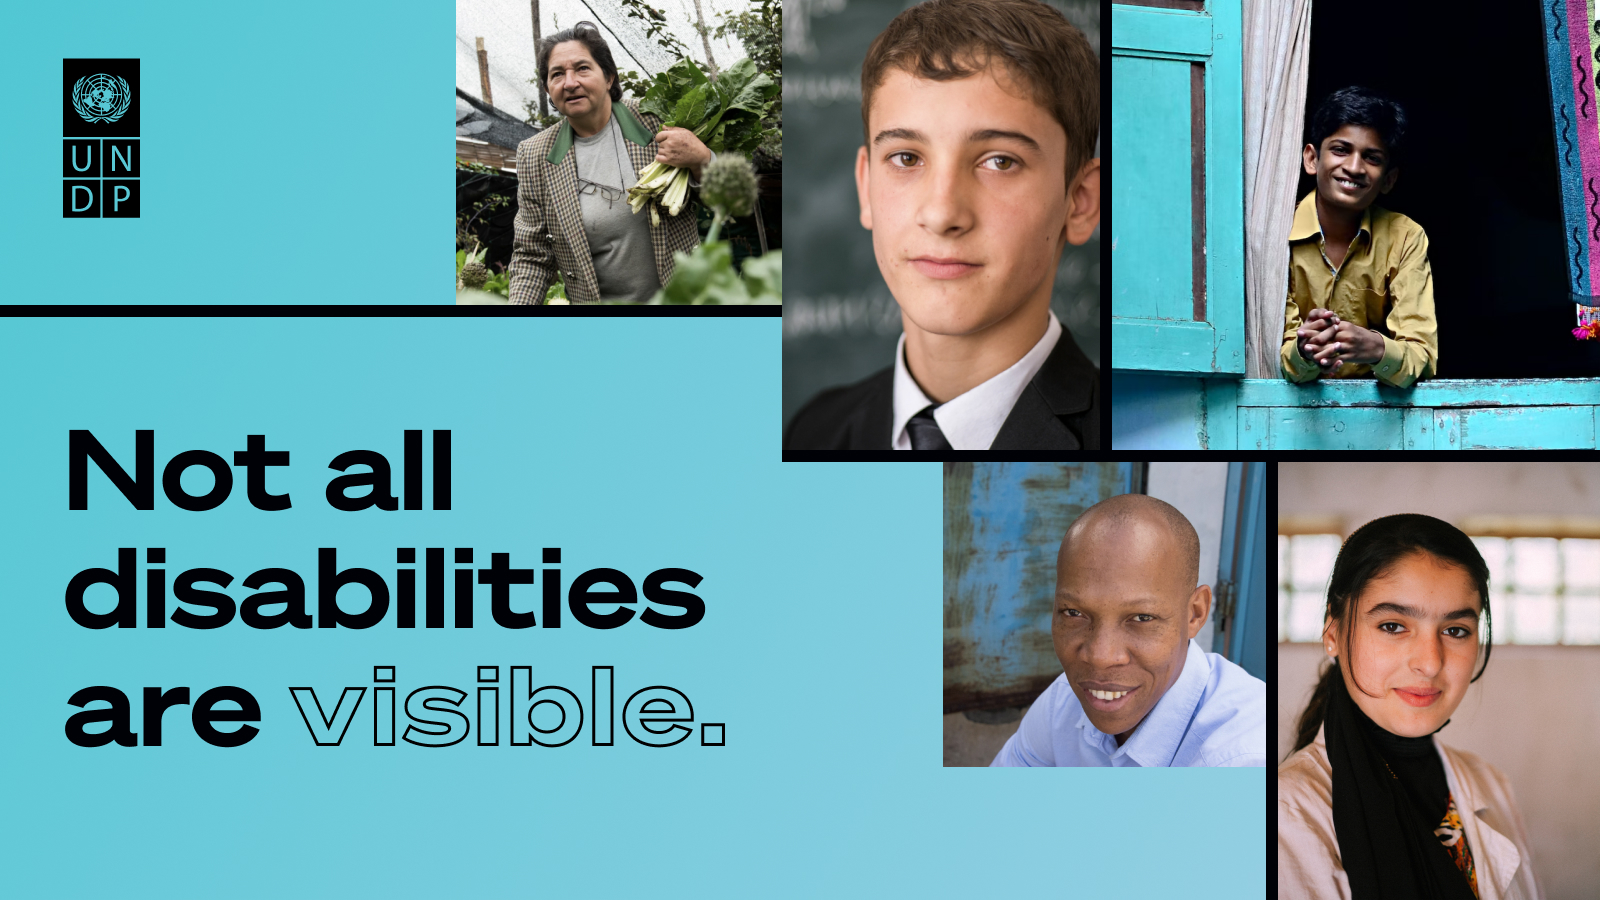 Graphic: Not all disabilities are visible